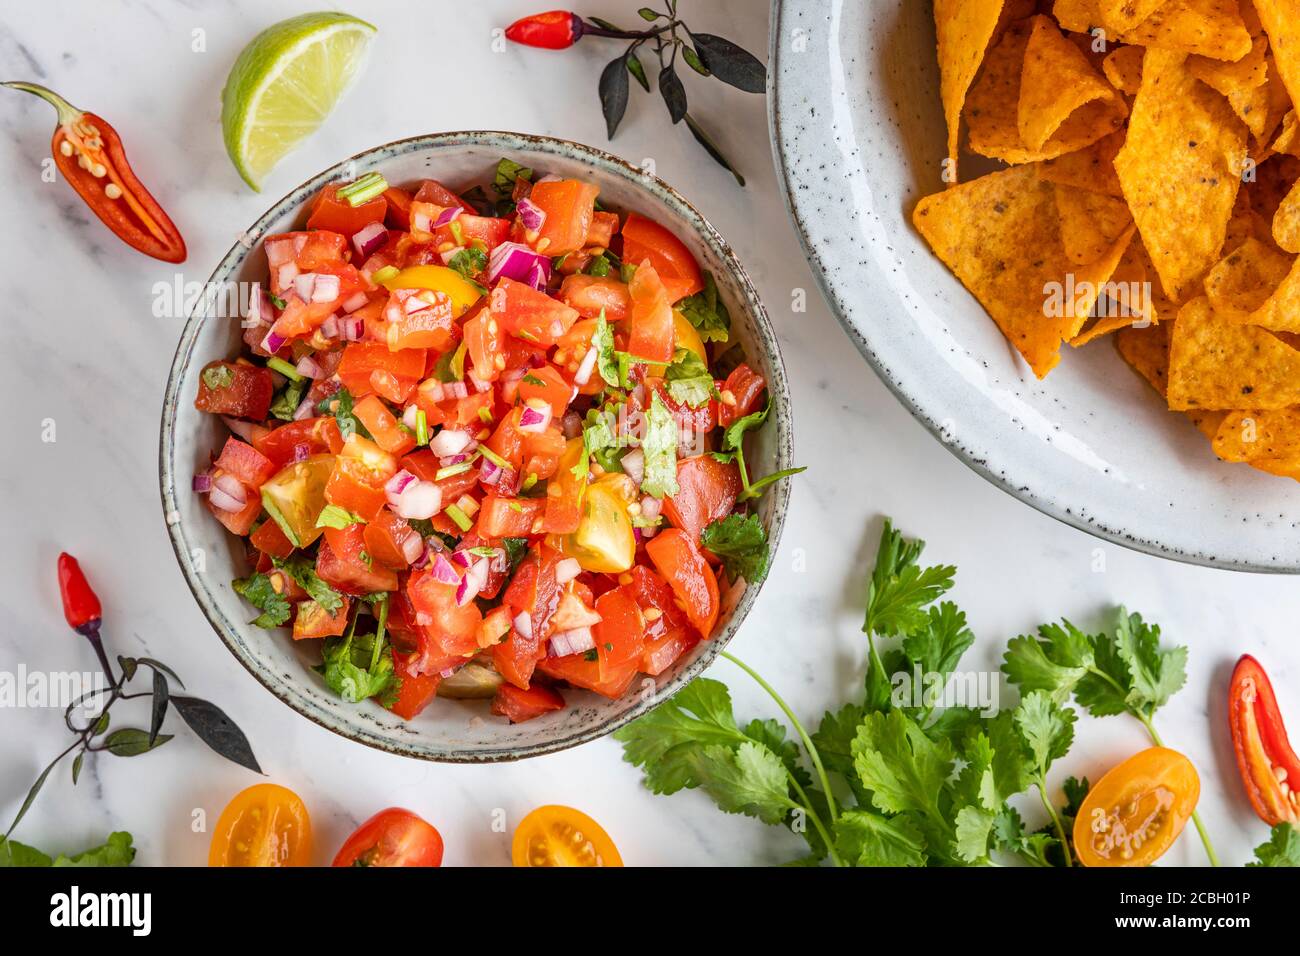 Tex Mex Pico de Gallo tomato salsa with nacho tortilla chips. The bowl is seen from above, flat lay, and there are ingredients scattered on the table: Stock Photo